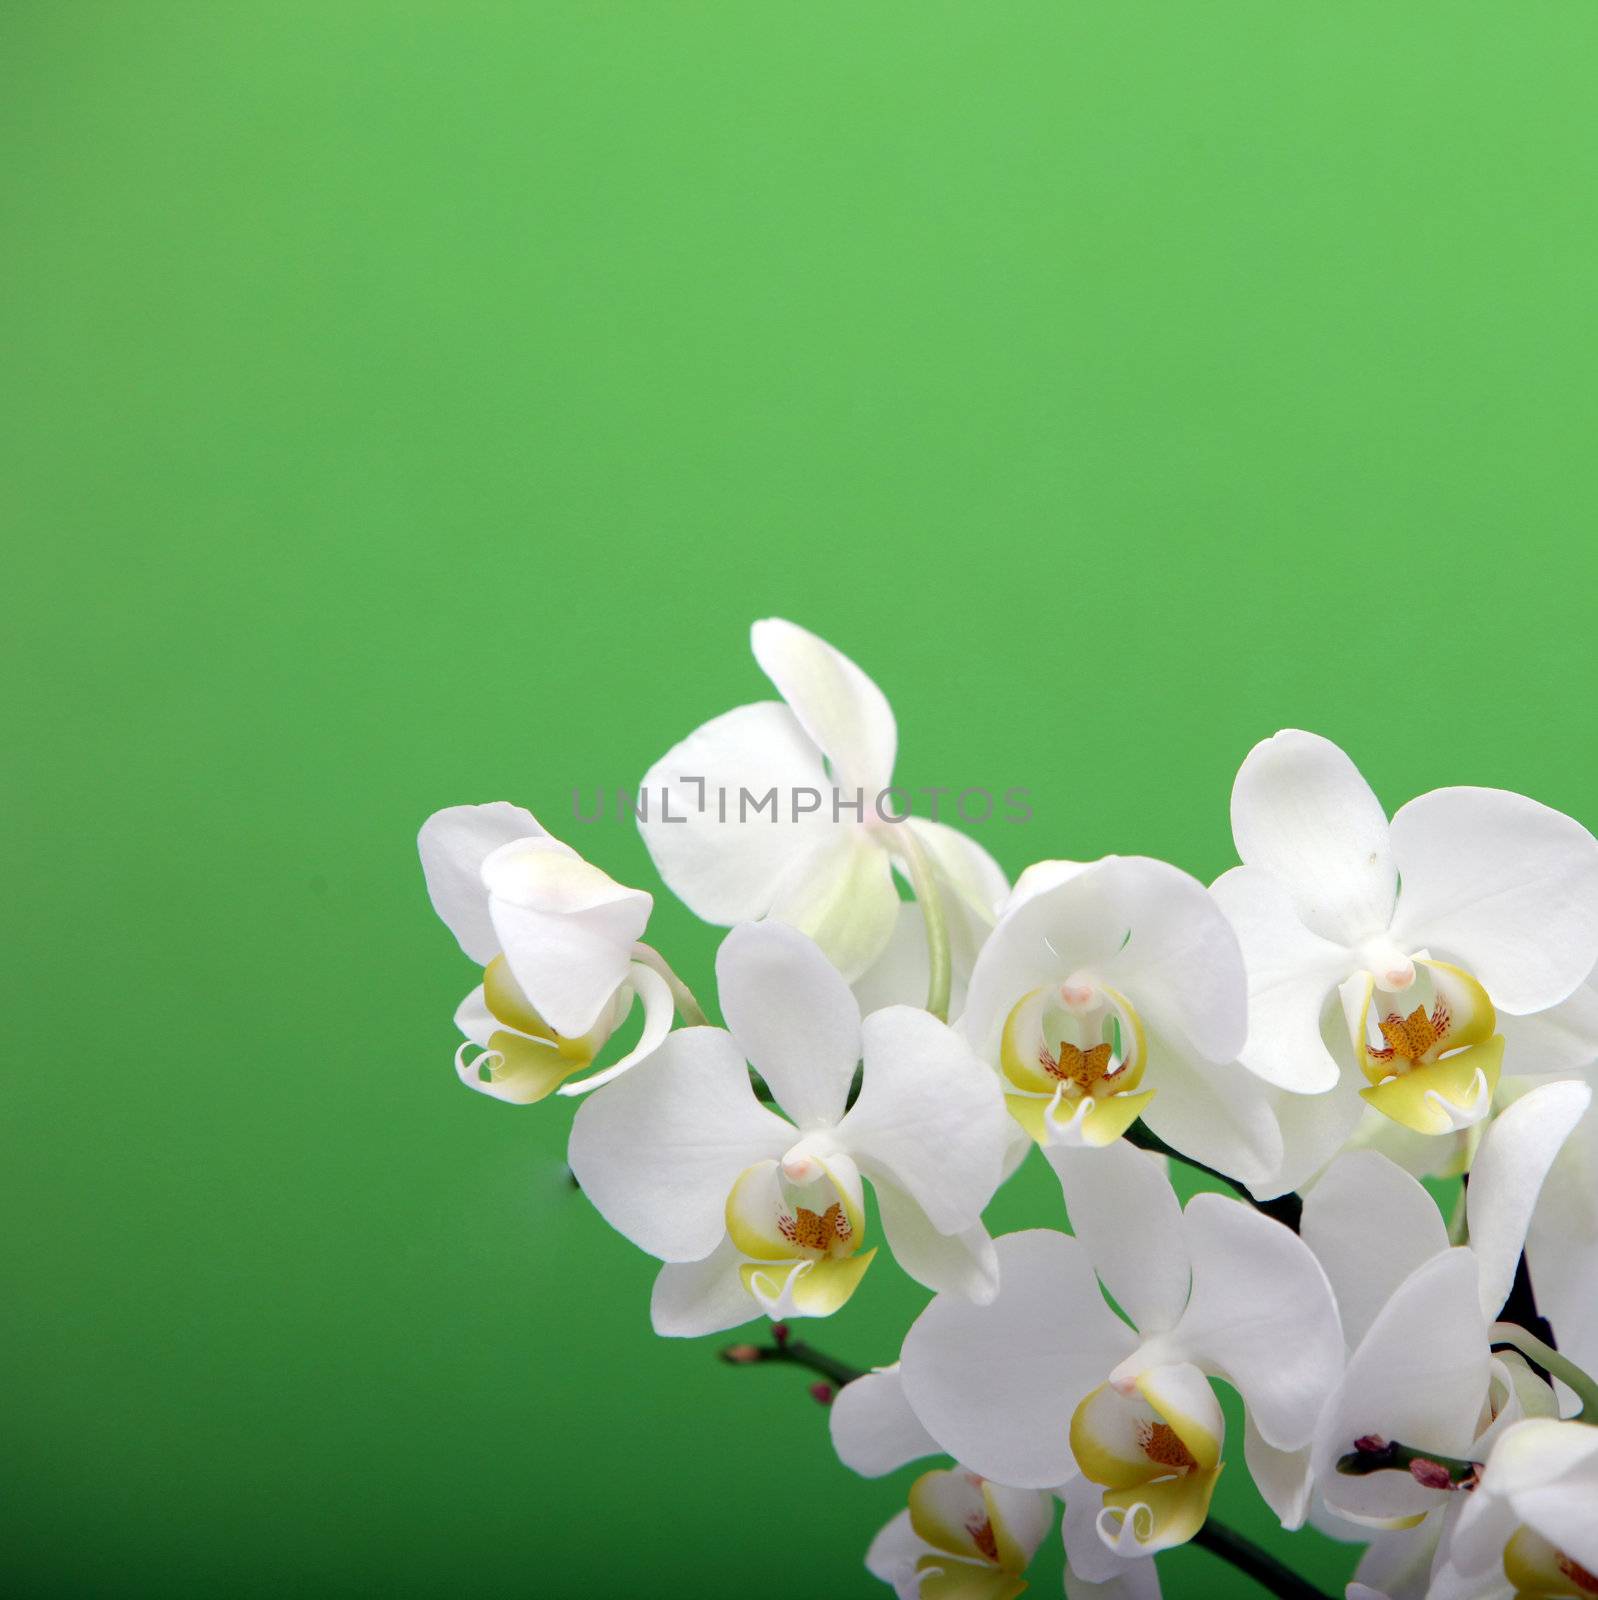 Spikes of decorative white Cymbidium orchids on a green background conceptual of spirituality, purity and wellbeing